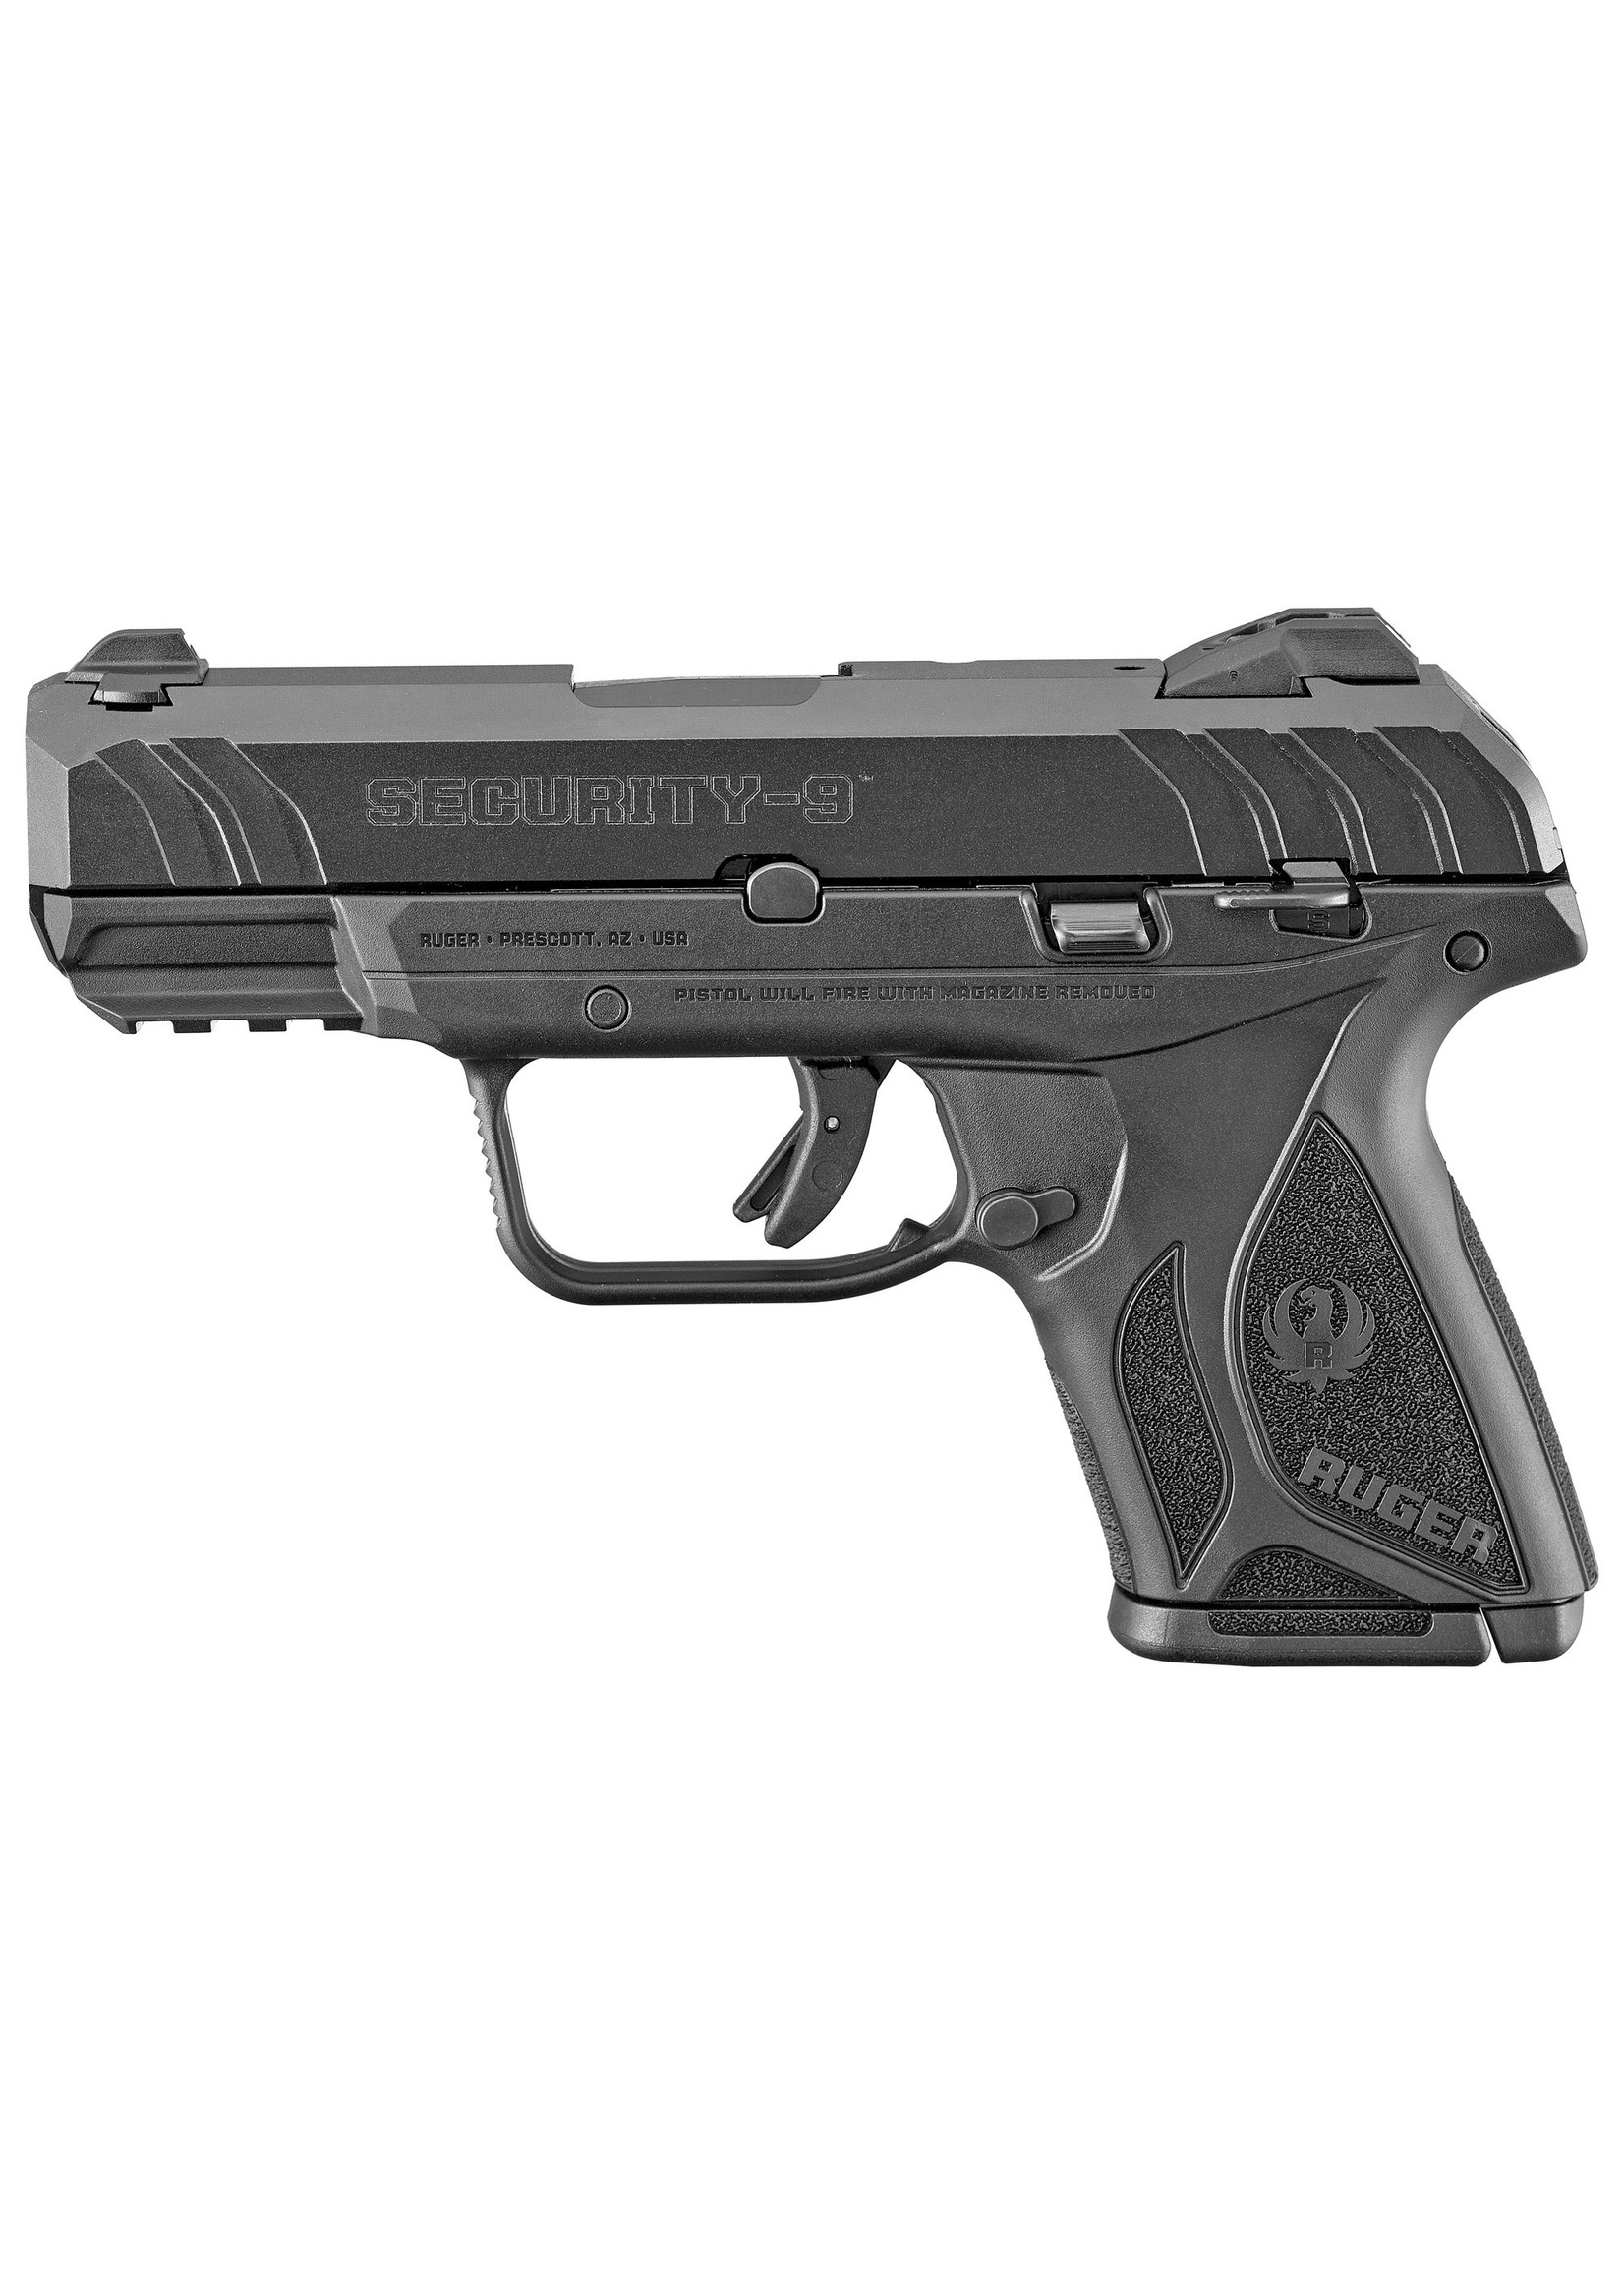 Ruger CLEARANCE Ruger Security-9 Compact Pistol BLK 10+1 3818 | includes 2 magazines, 9mm